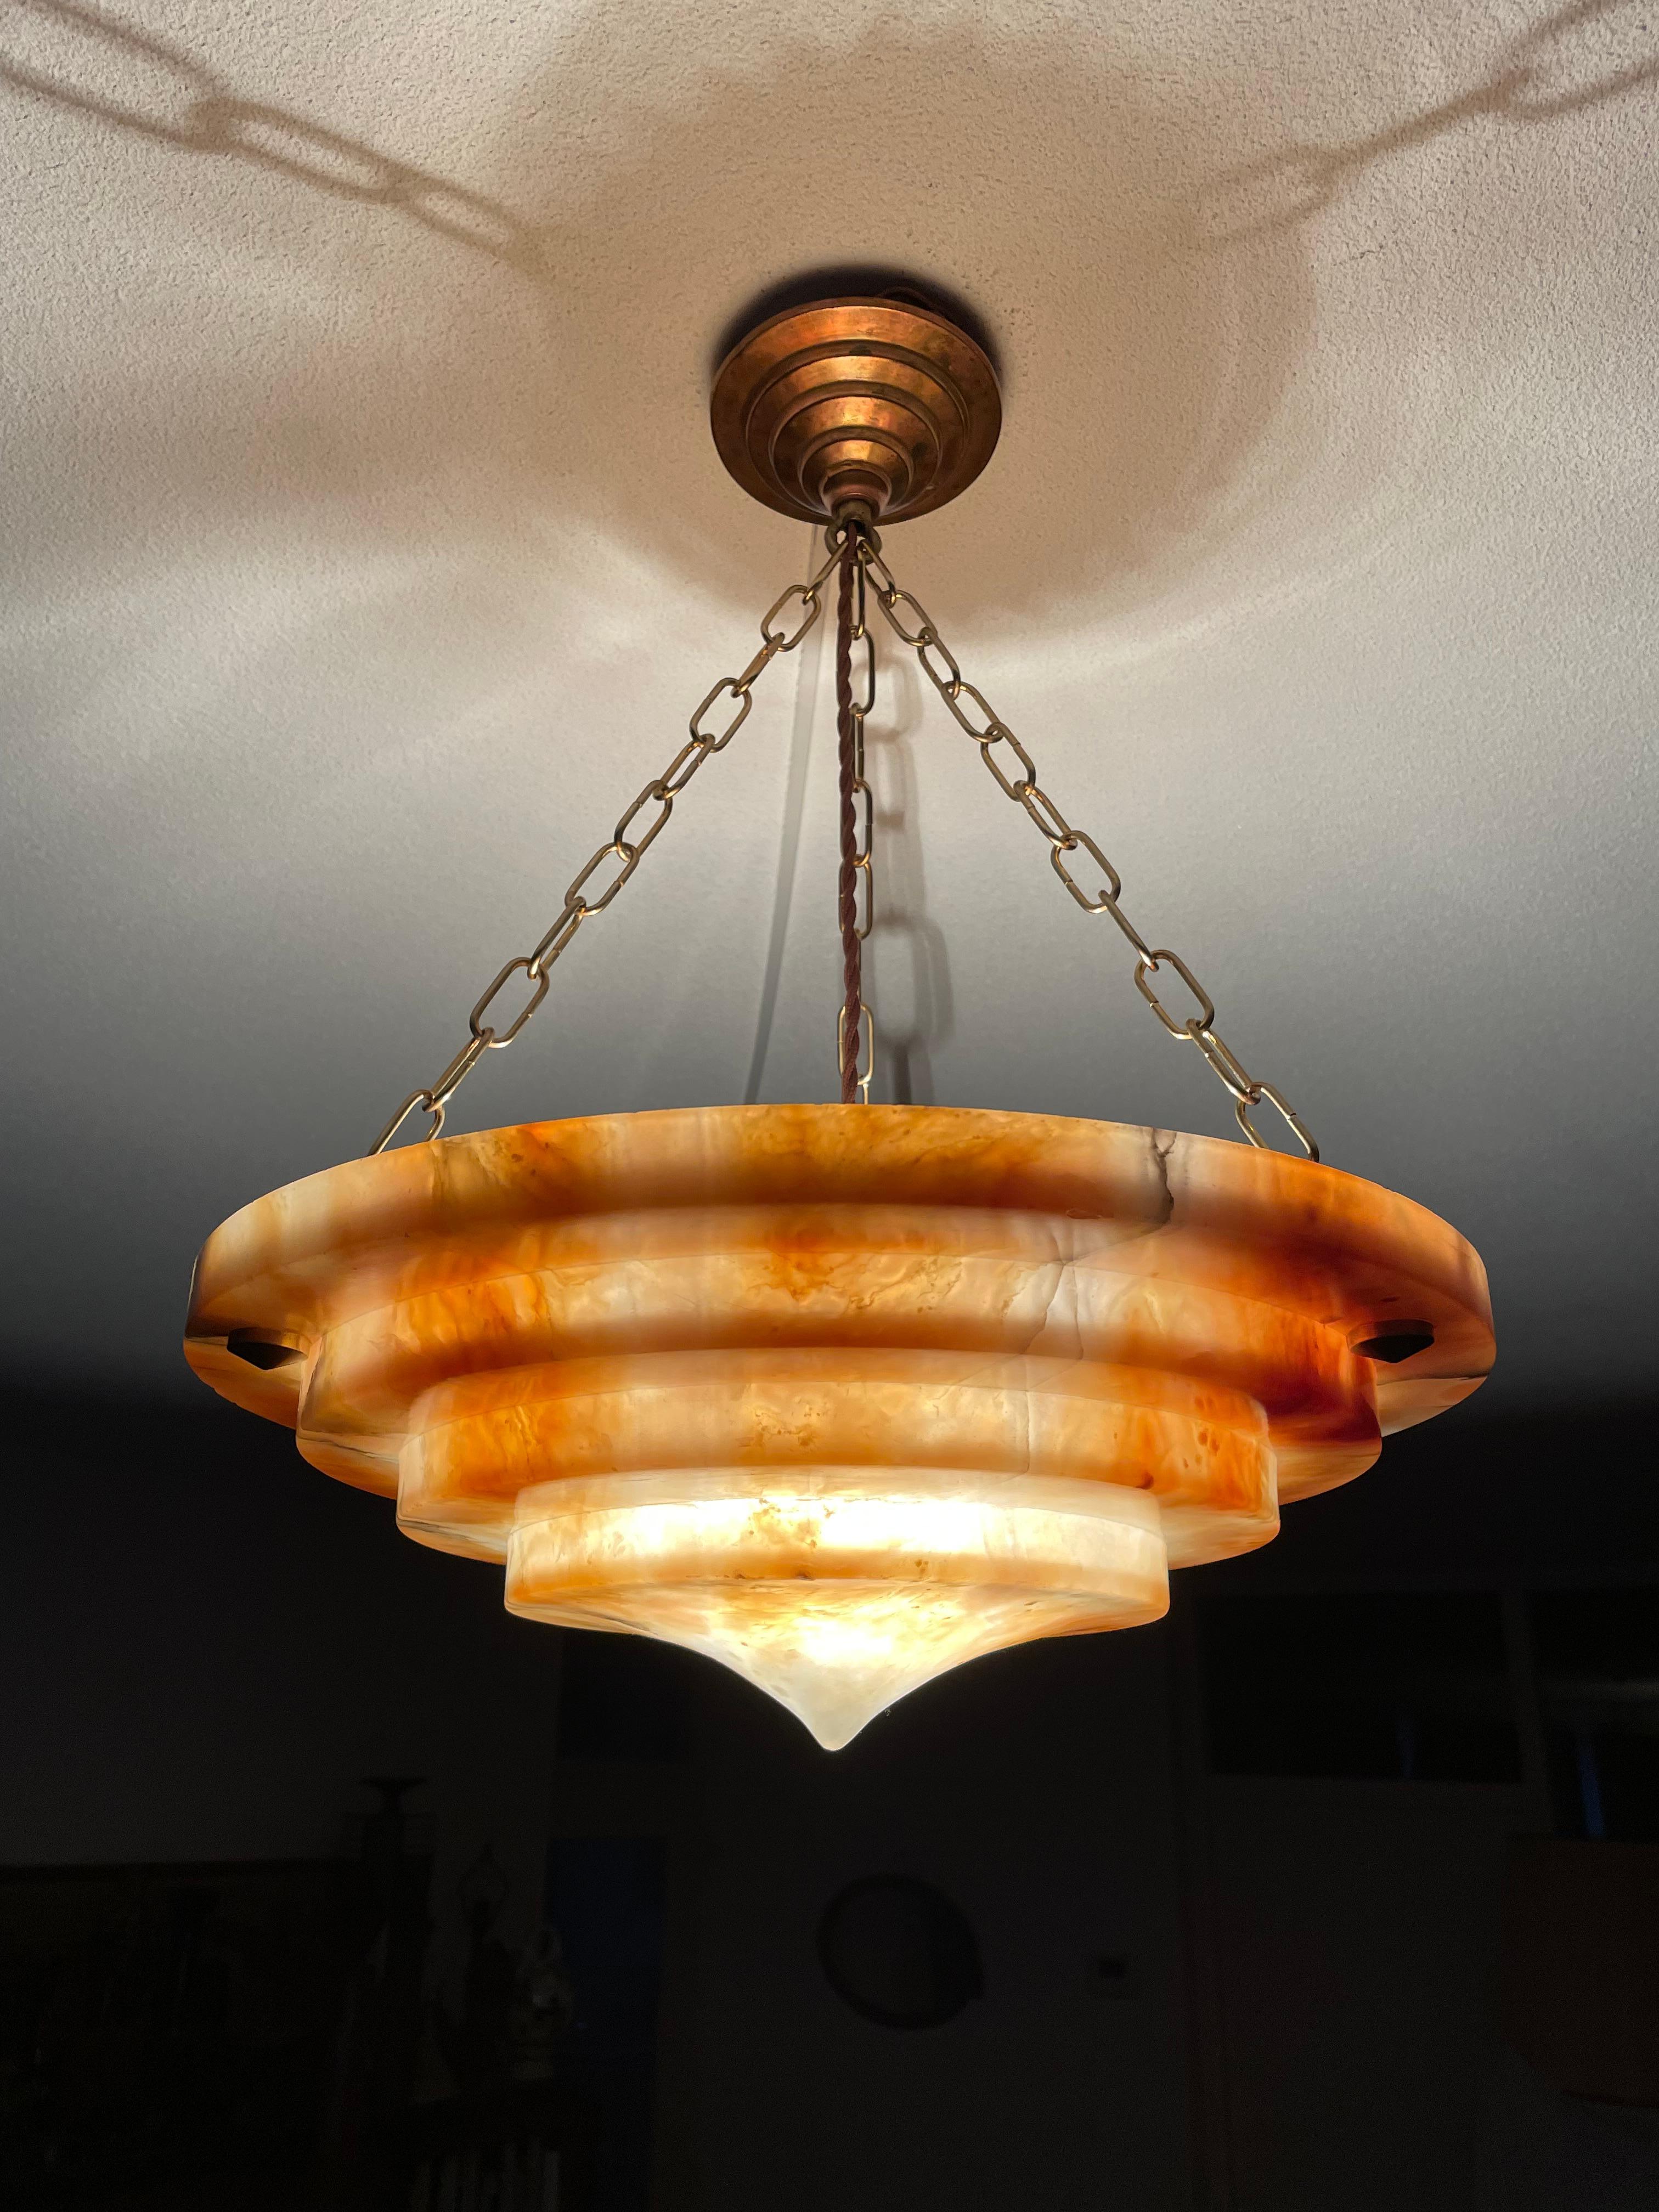 French Pure Art Deco Alabaster Pendant Light w. Matching Copper Canopy & Bronzed Chain